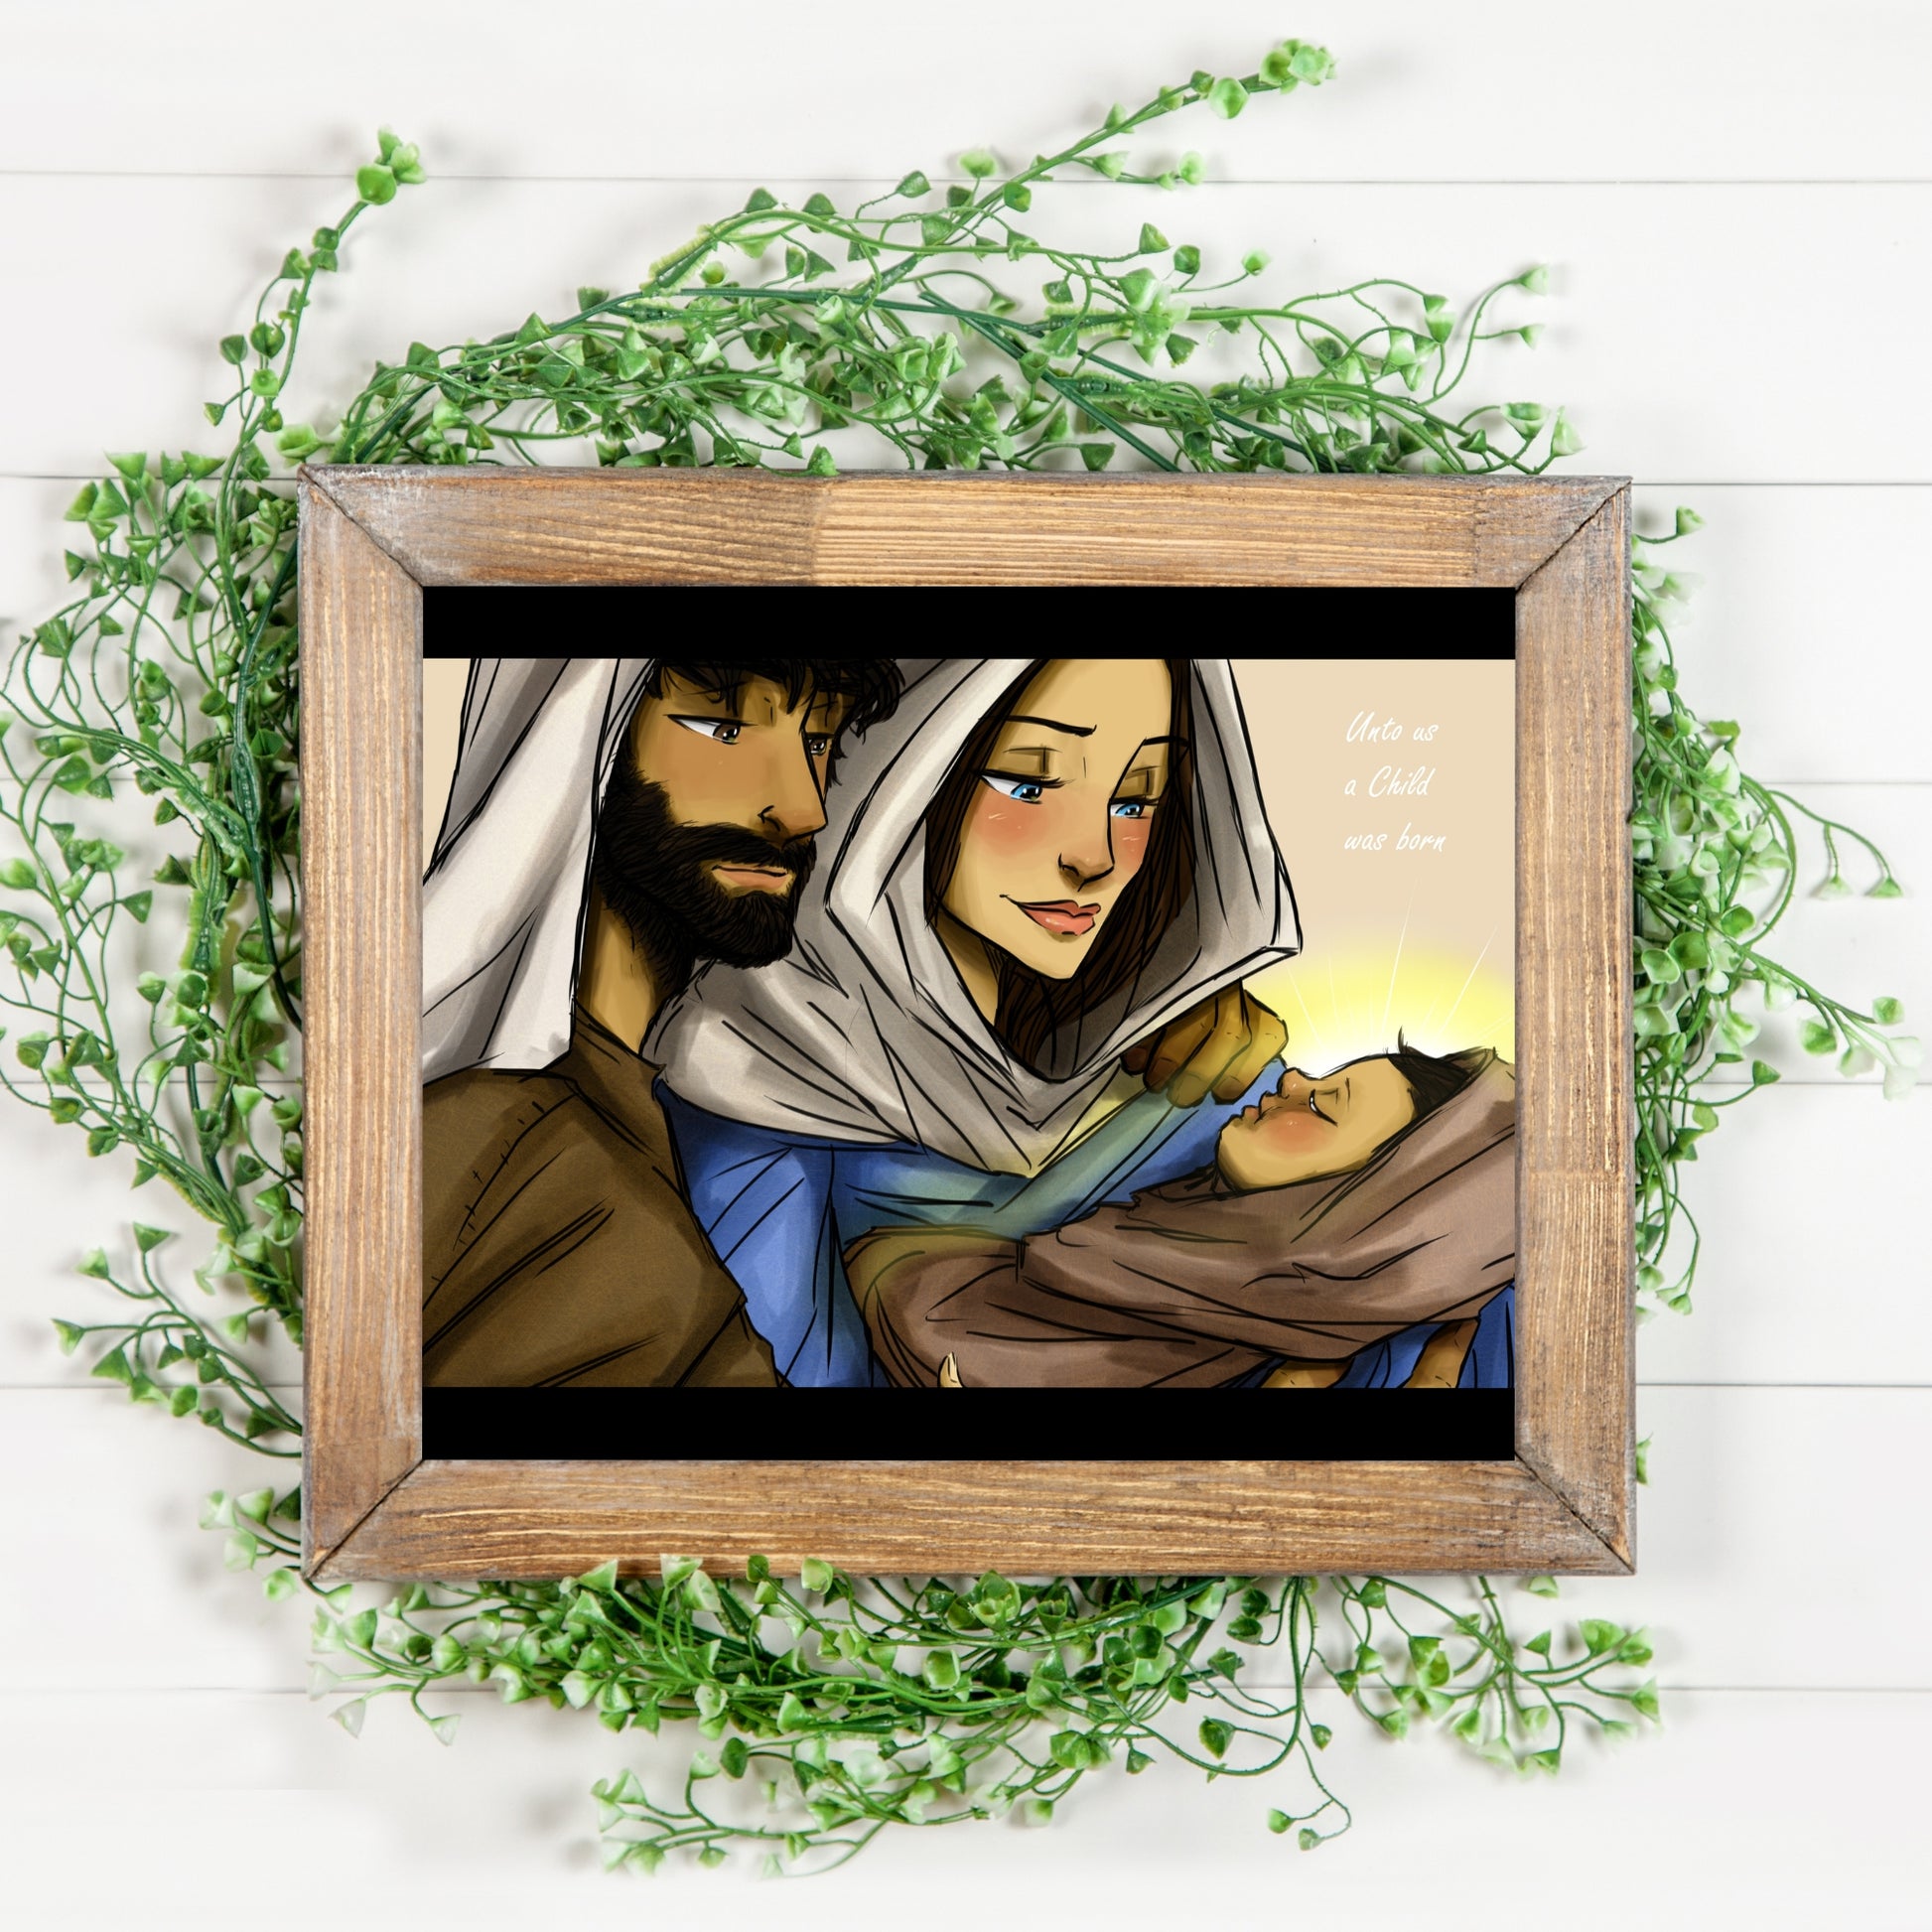 Baby Jesus, Mary, and Joseph Original Art - Inspirational Art Print shown in rustic brown wood frame | Reads in white text... Unto us a Child was born | art by Megan, Barby Ink | Barby Designs | INSIDE OUT